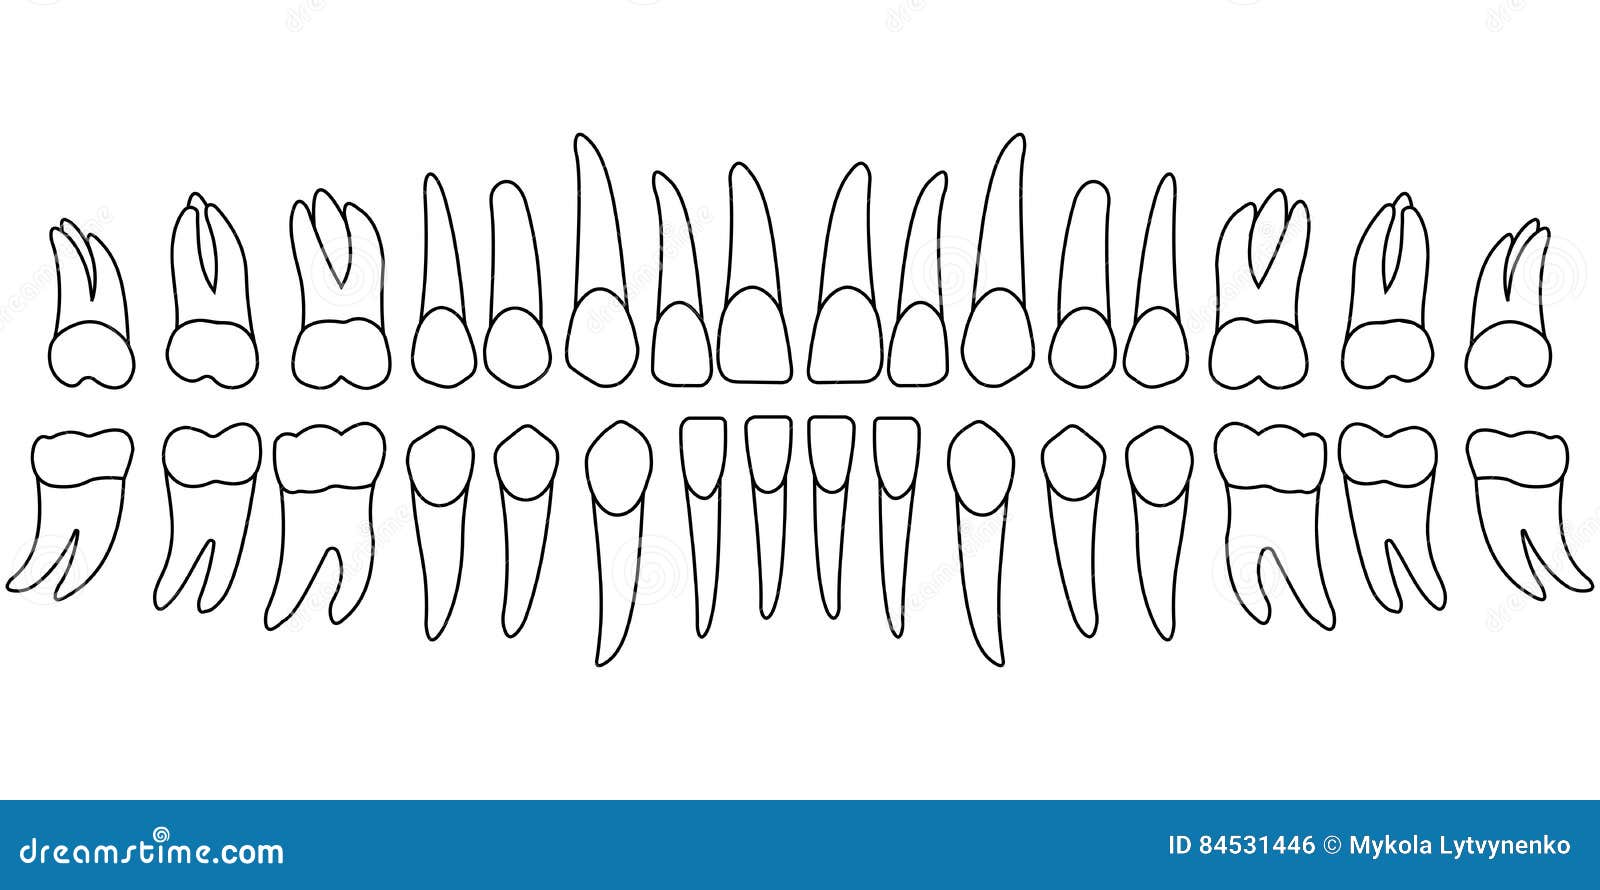 Teeth Chart Images